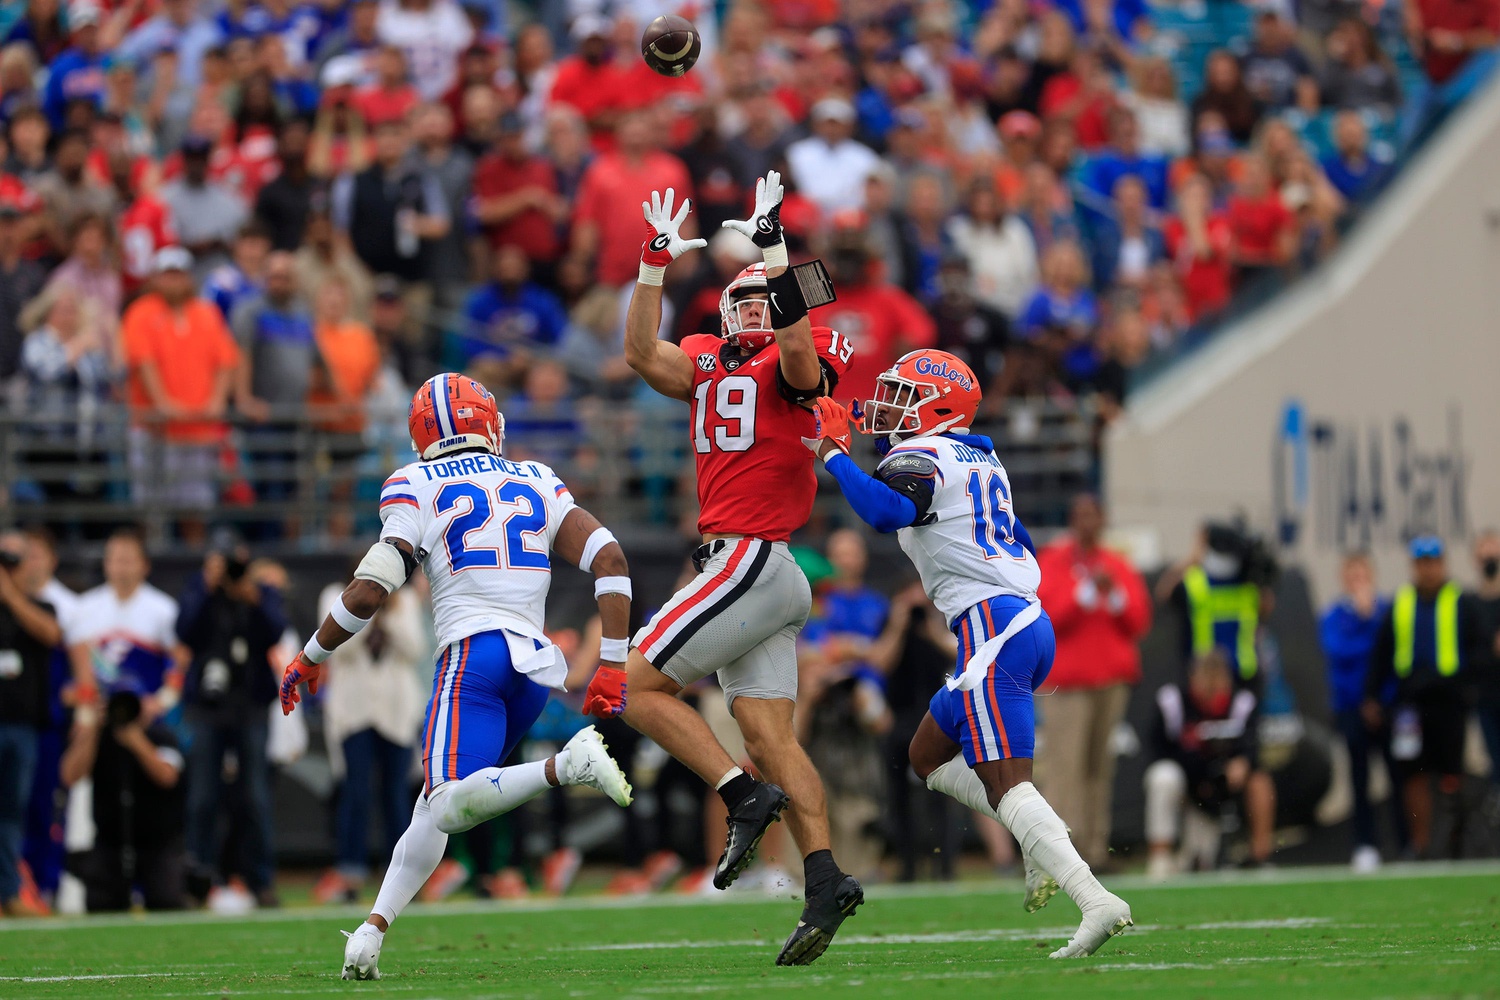 Georgia Bulldogs tight end Brock Bowers (19) hauls in a reception against Florida safeties Tre'Vez Johnson (16) and Rashad Torrence II (22). © Corey Perrine / USA TODAY NETWORK